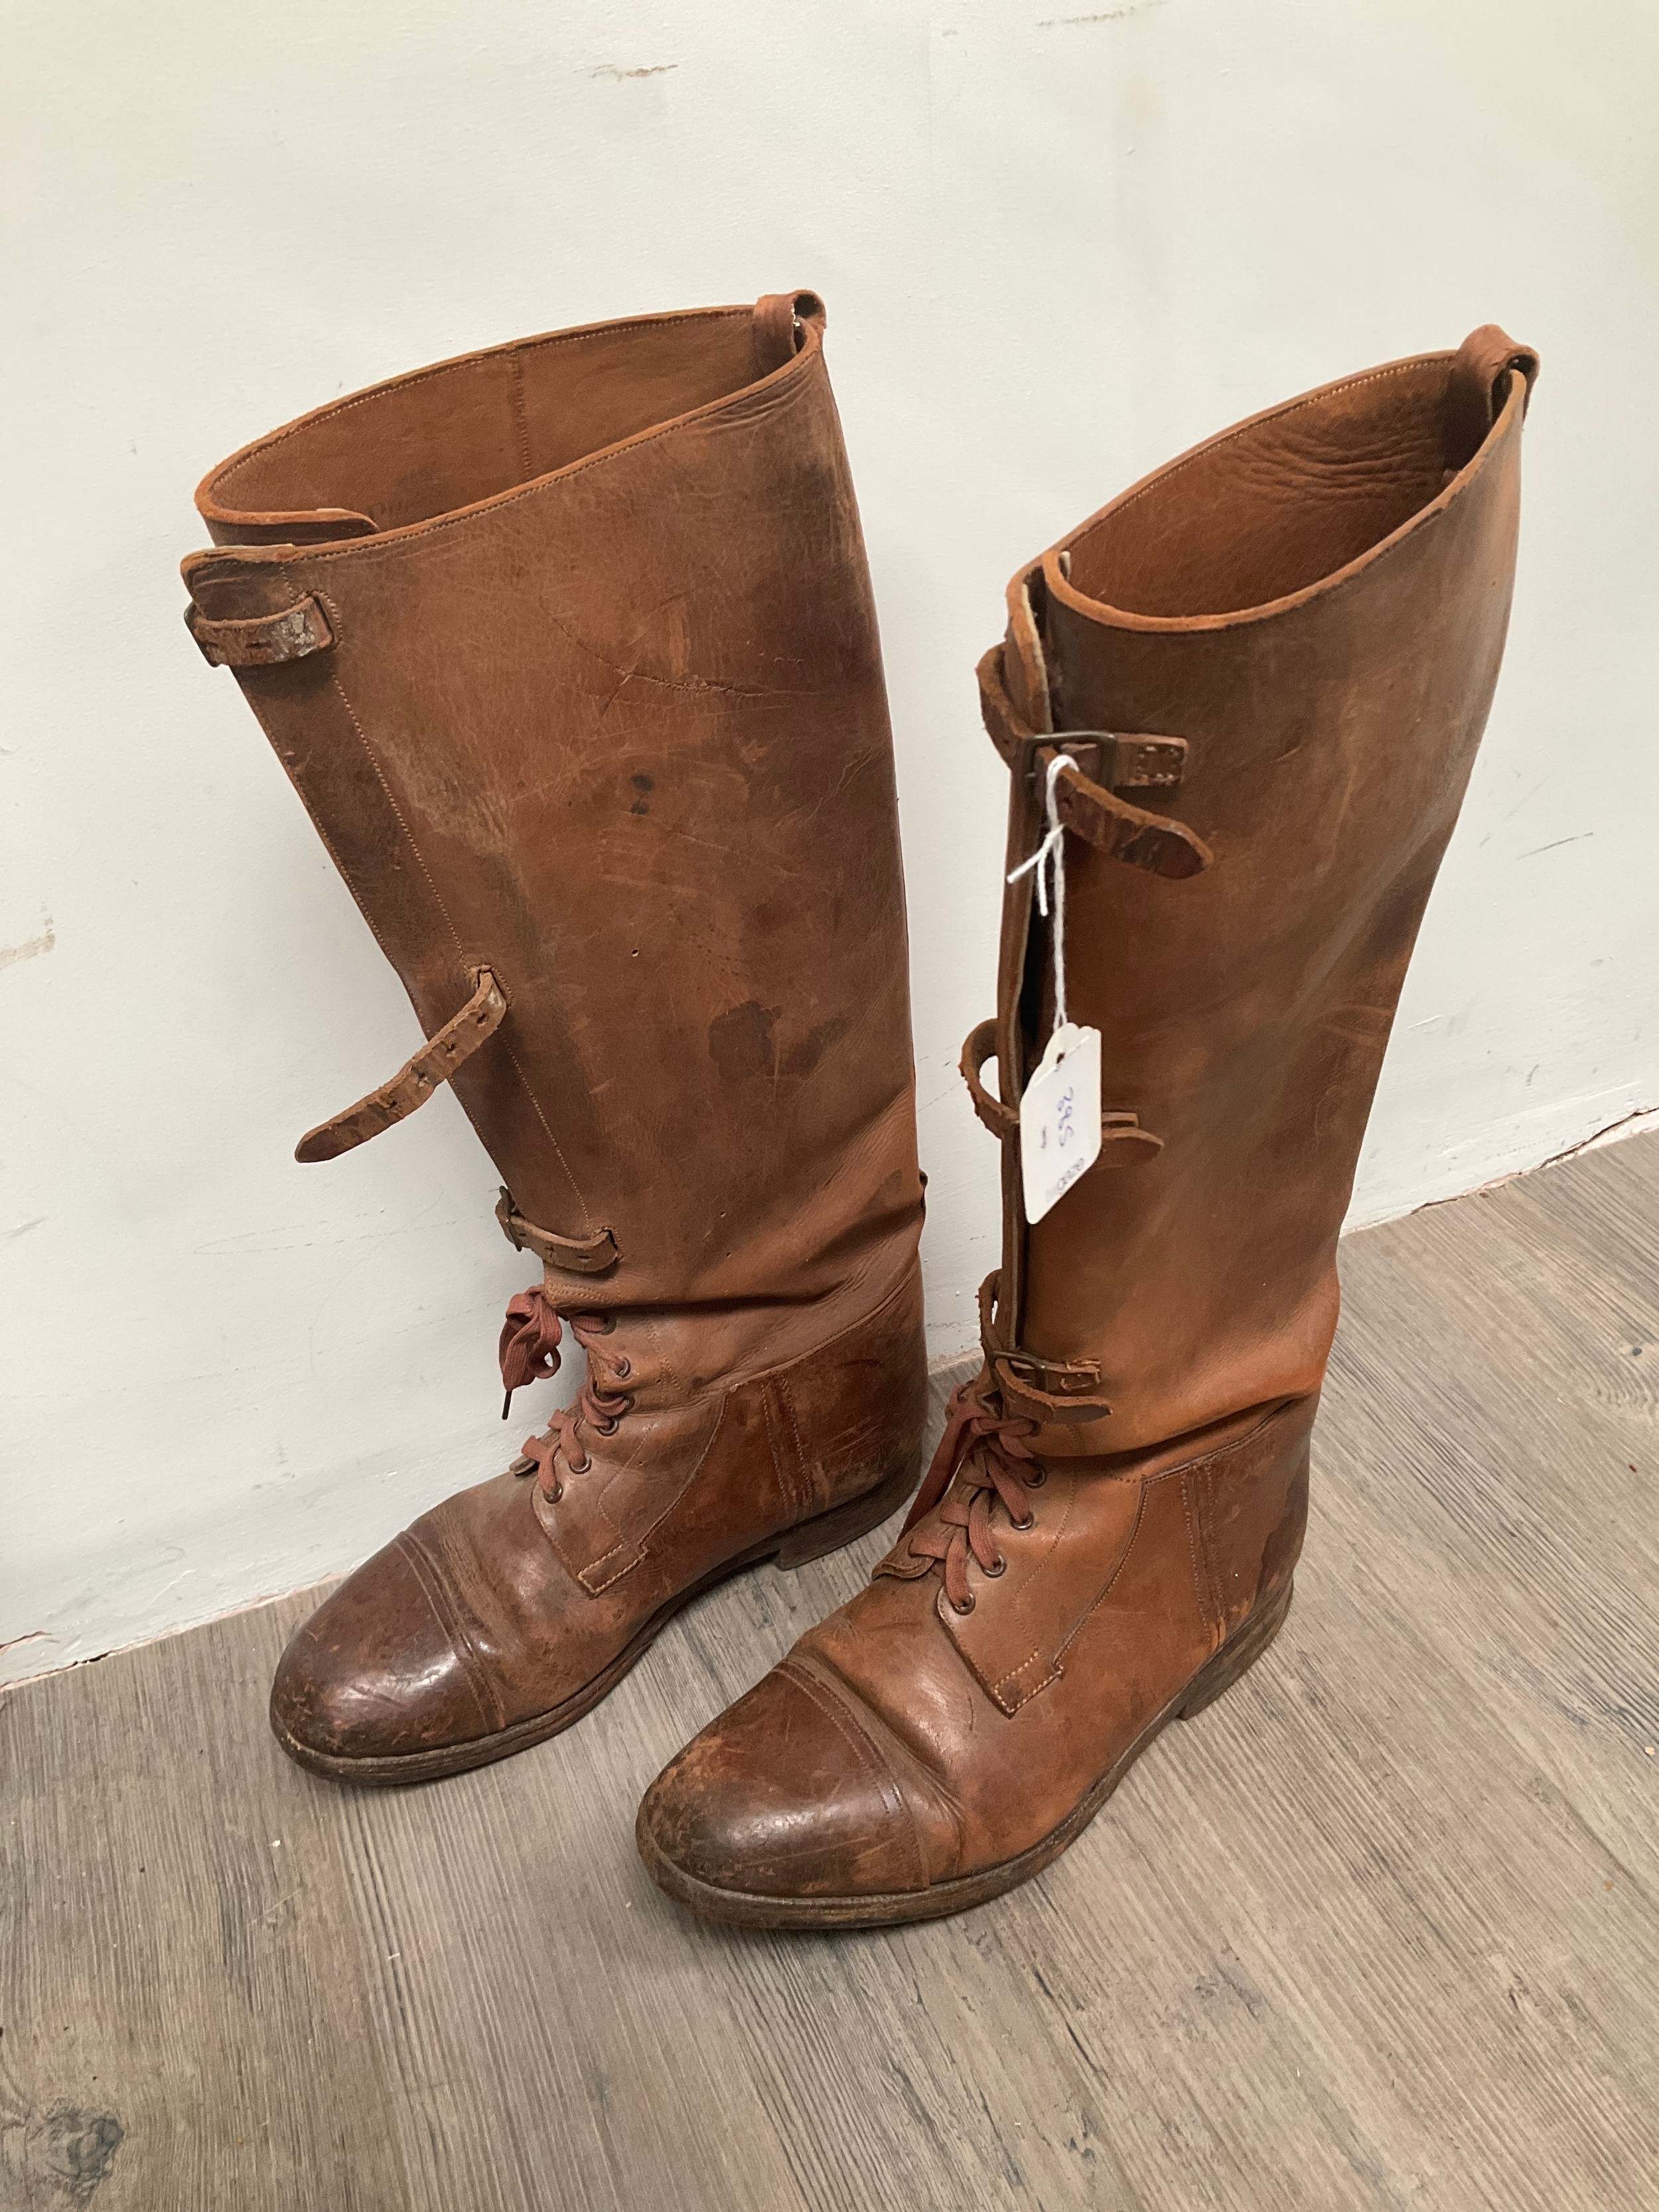 A pair of WWI era British officer's field boots, some damage